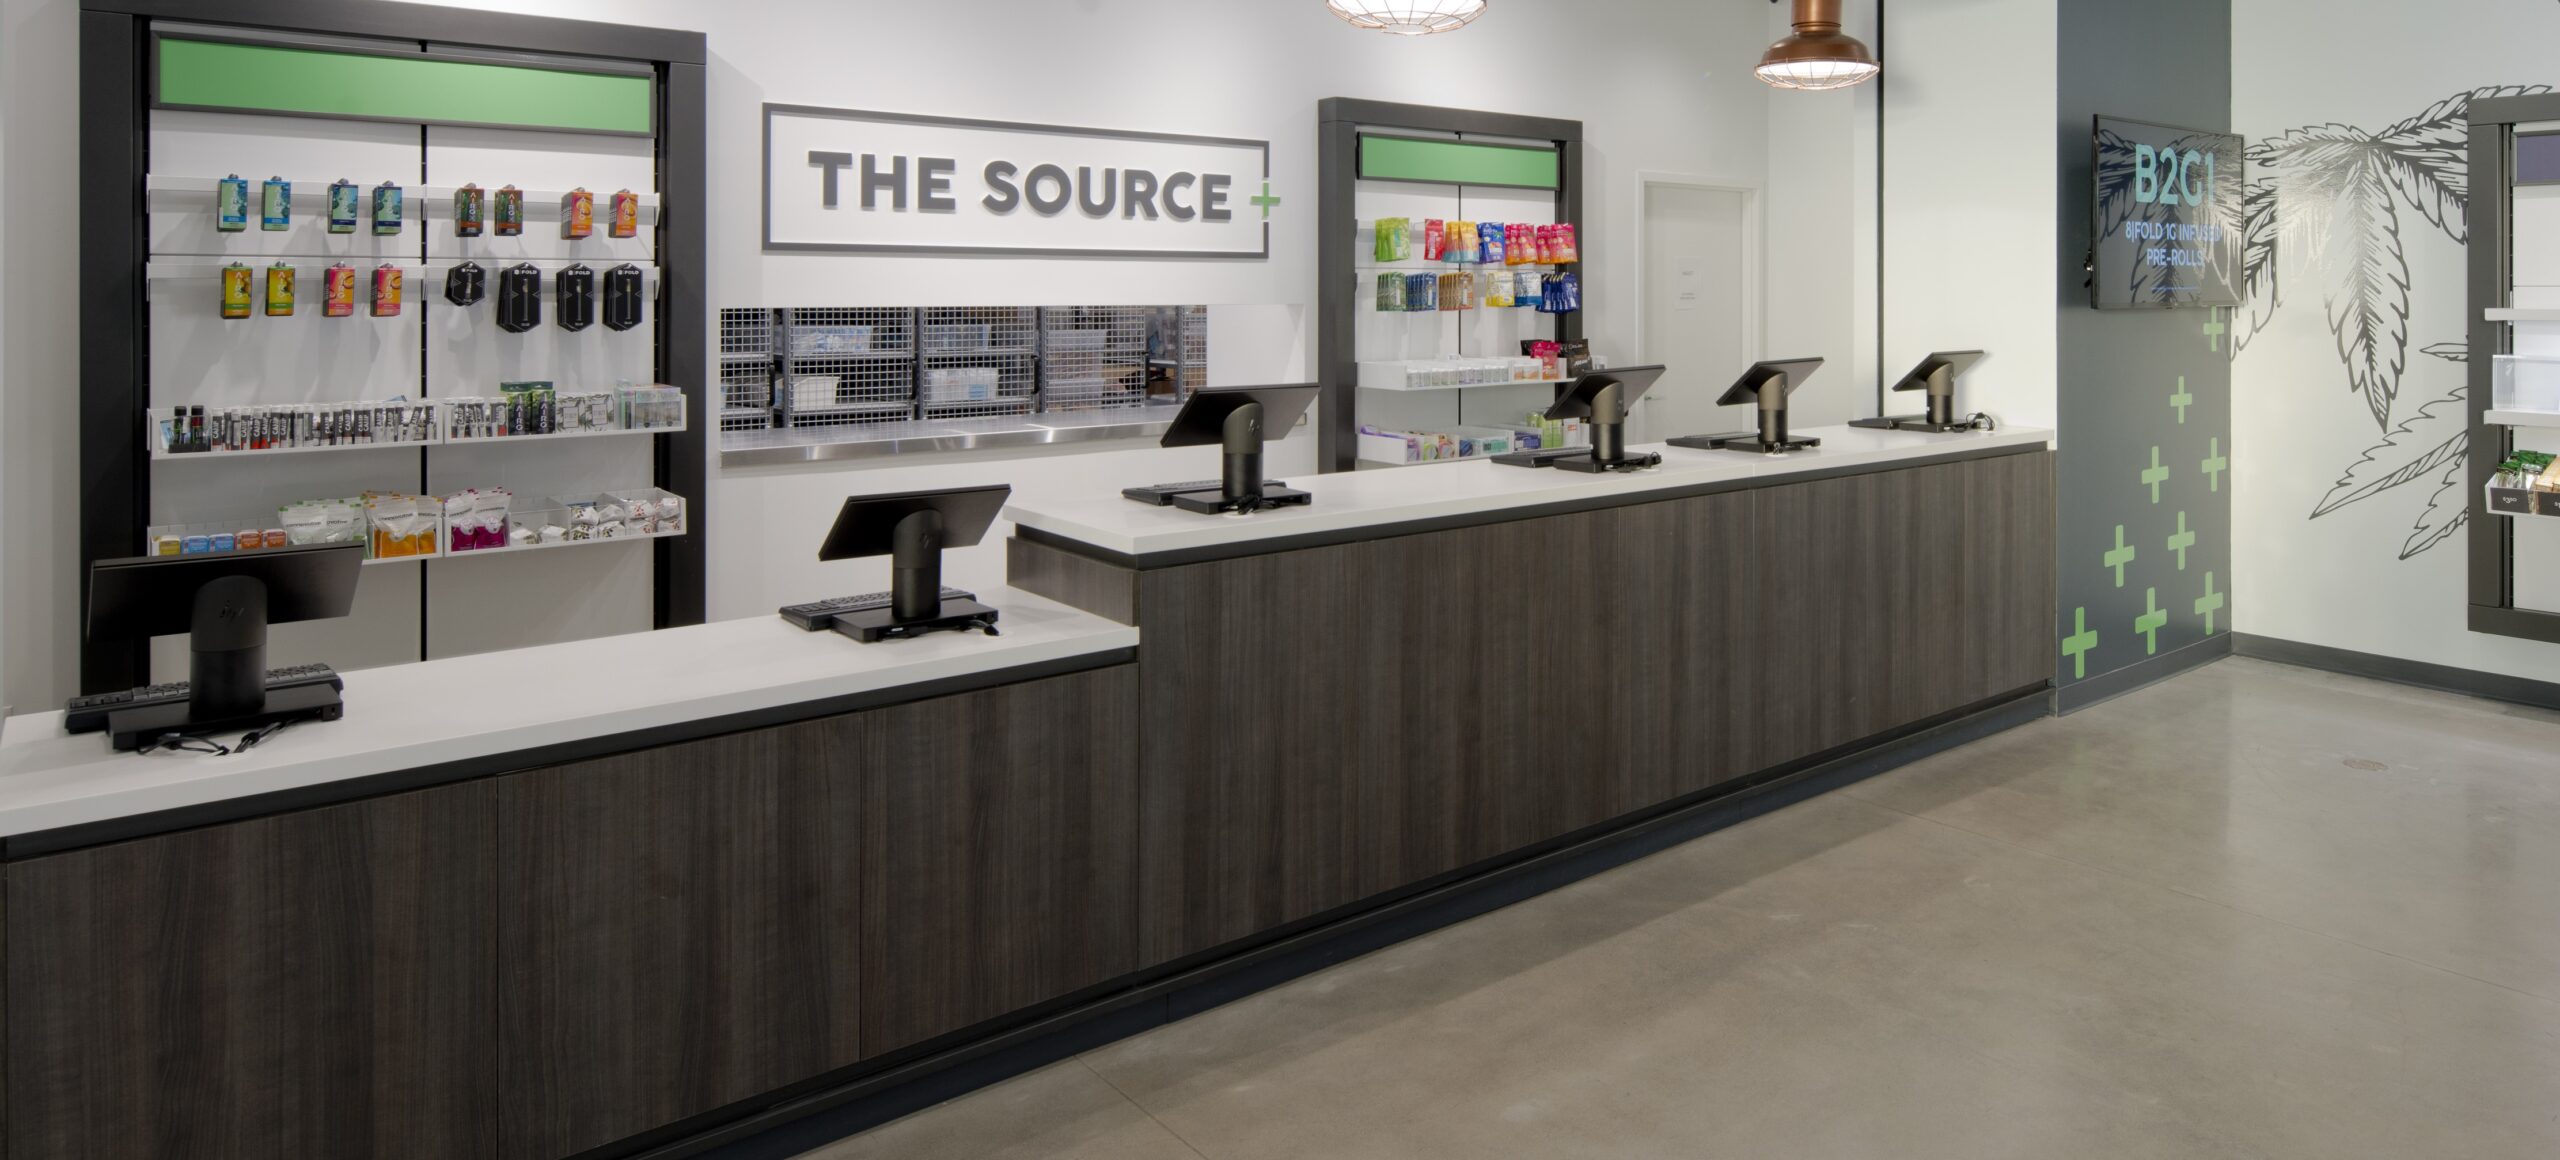 The Source Cannabis Dispensary Counters